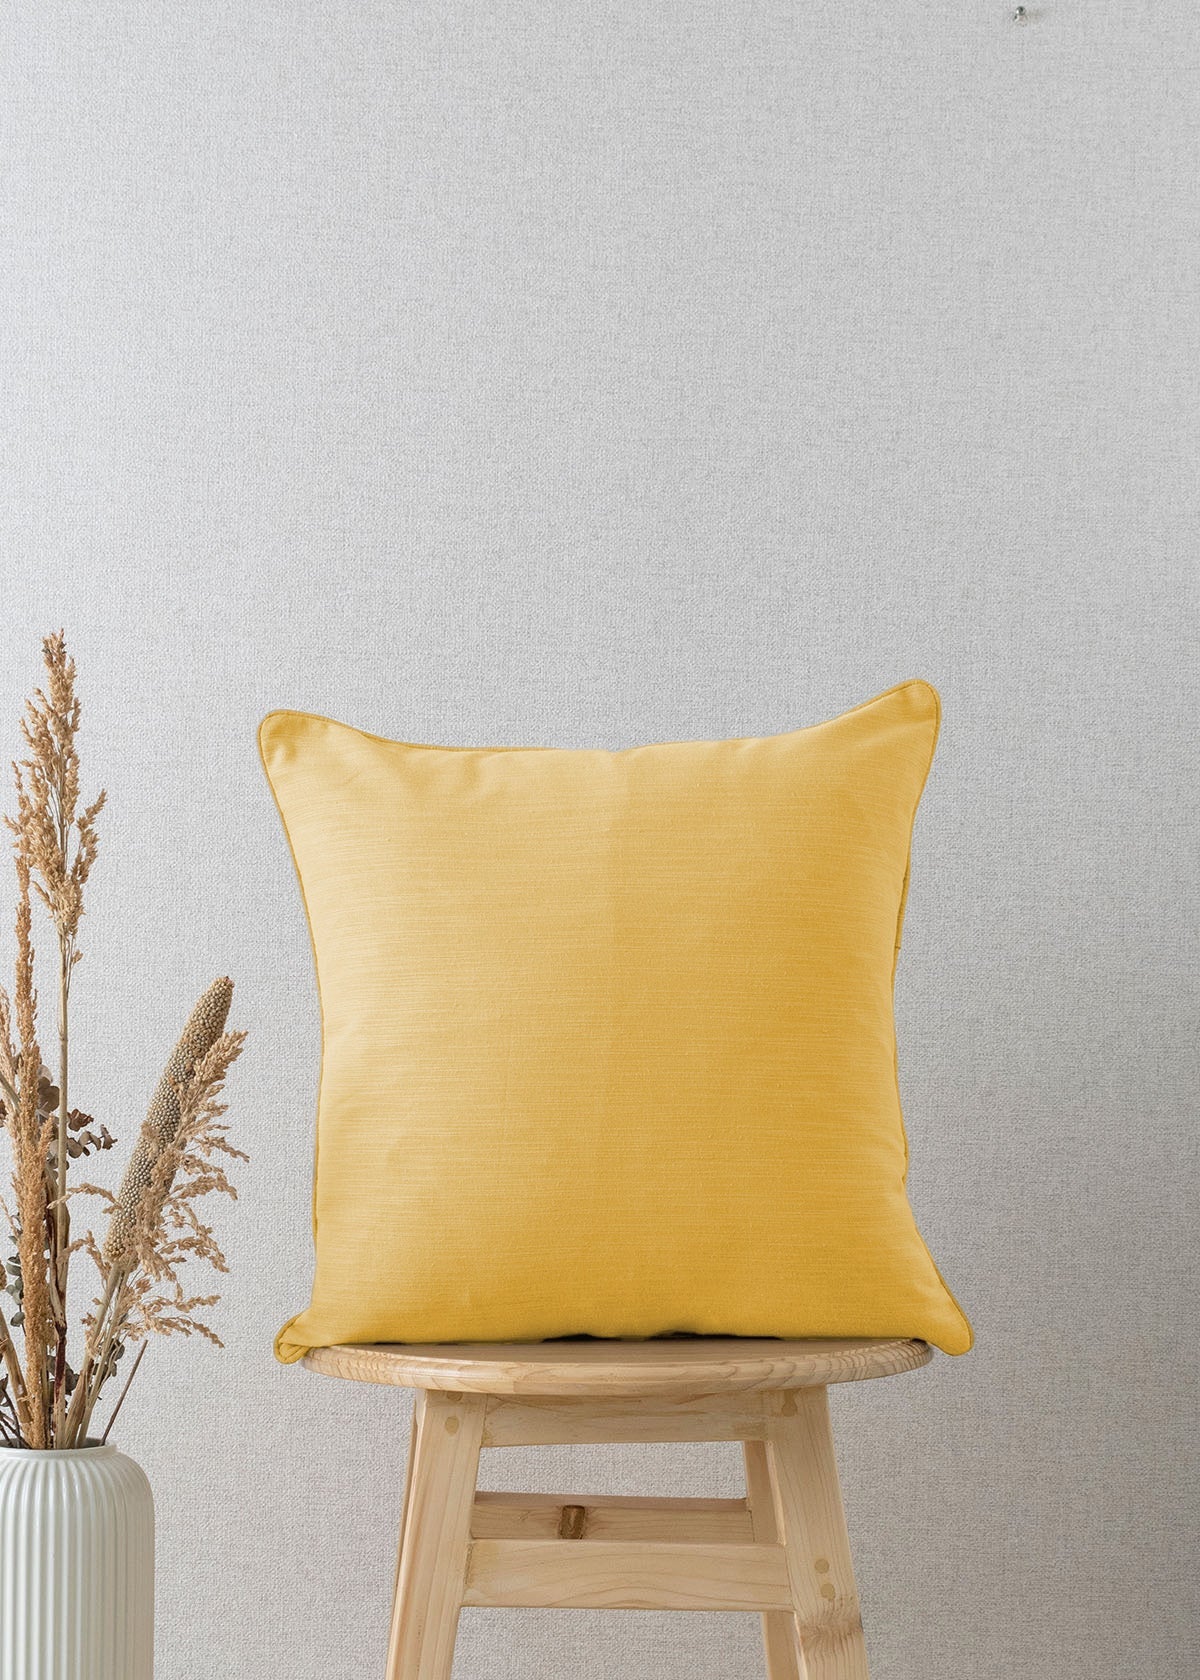 Solid Mustard 100% cotton plain cushion cover for sofa